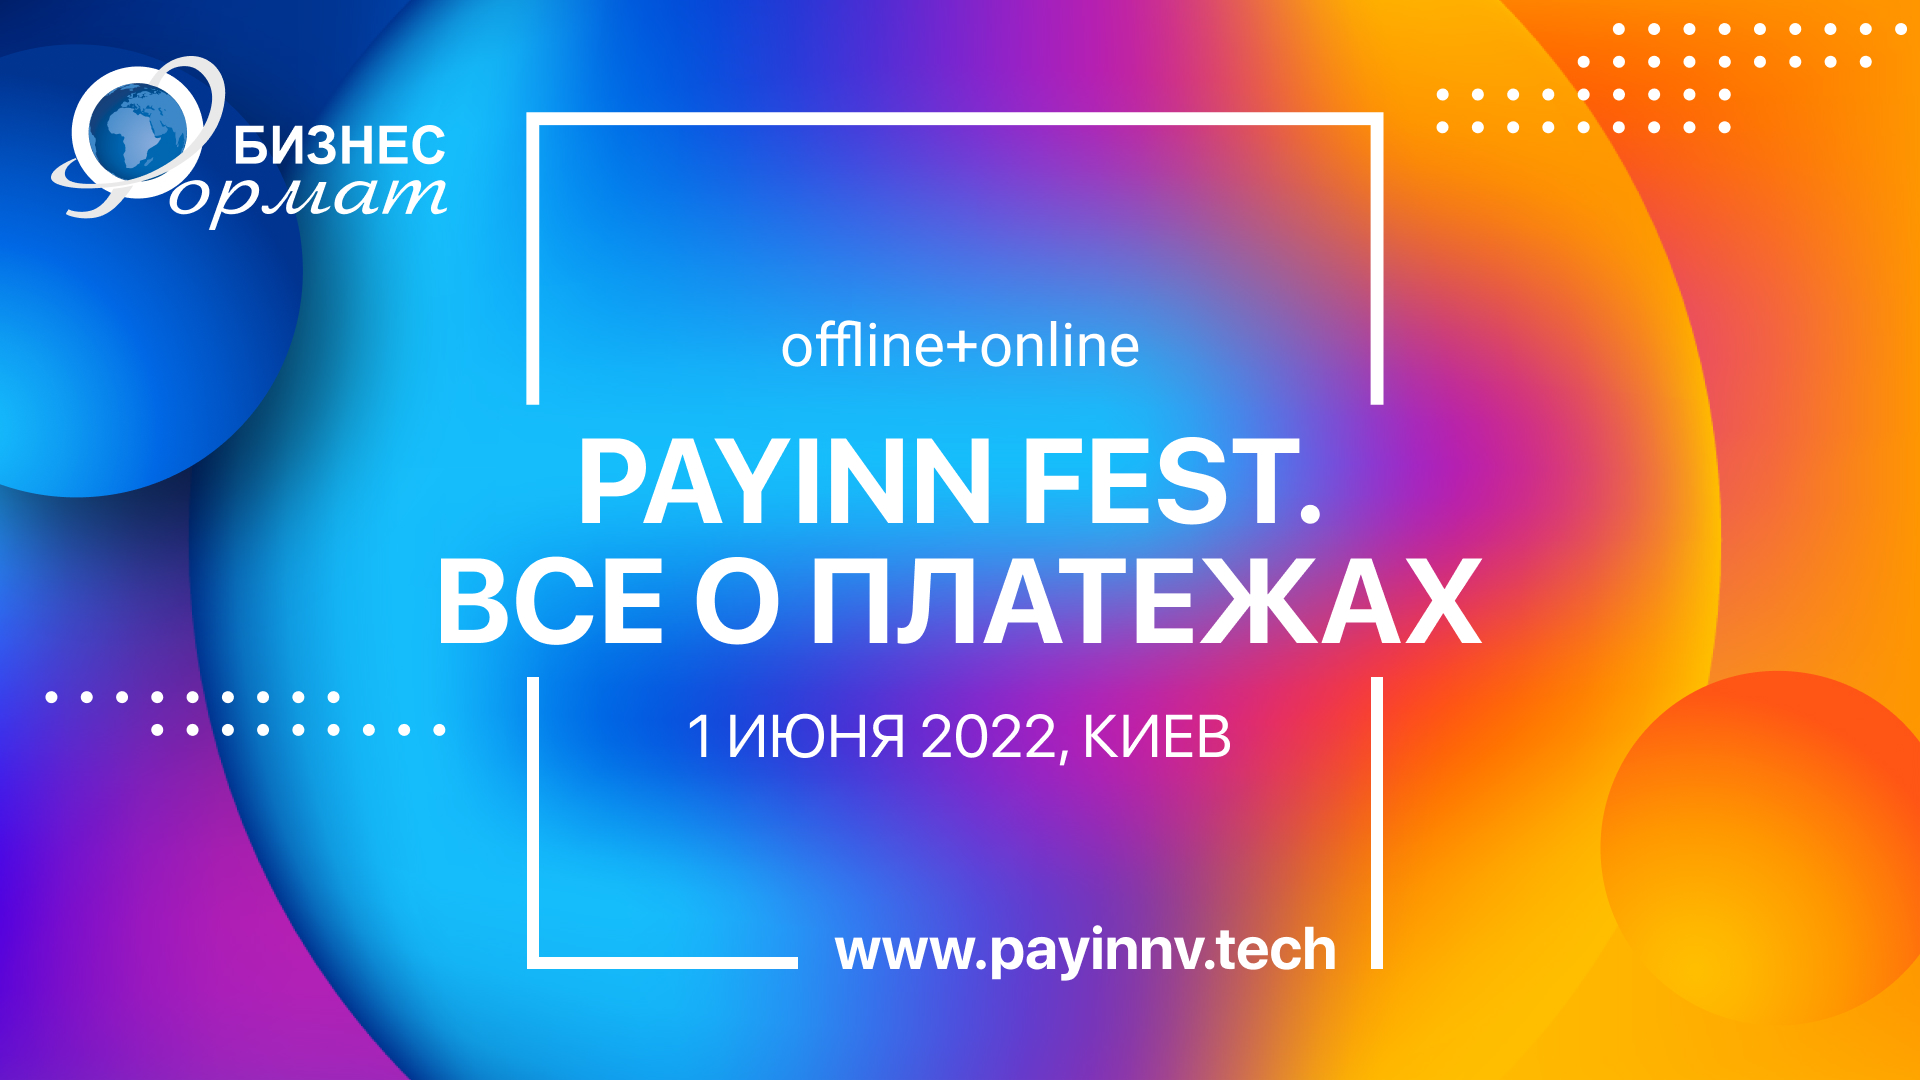 PAYINN FEST. EVERYTHING ABOUT PAYMENTS